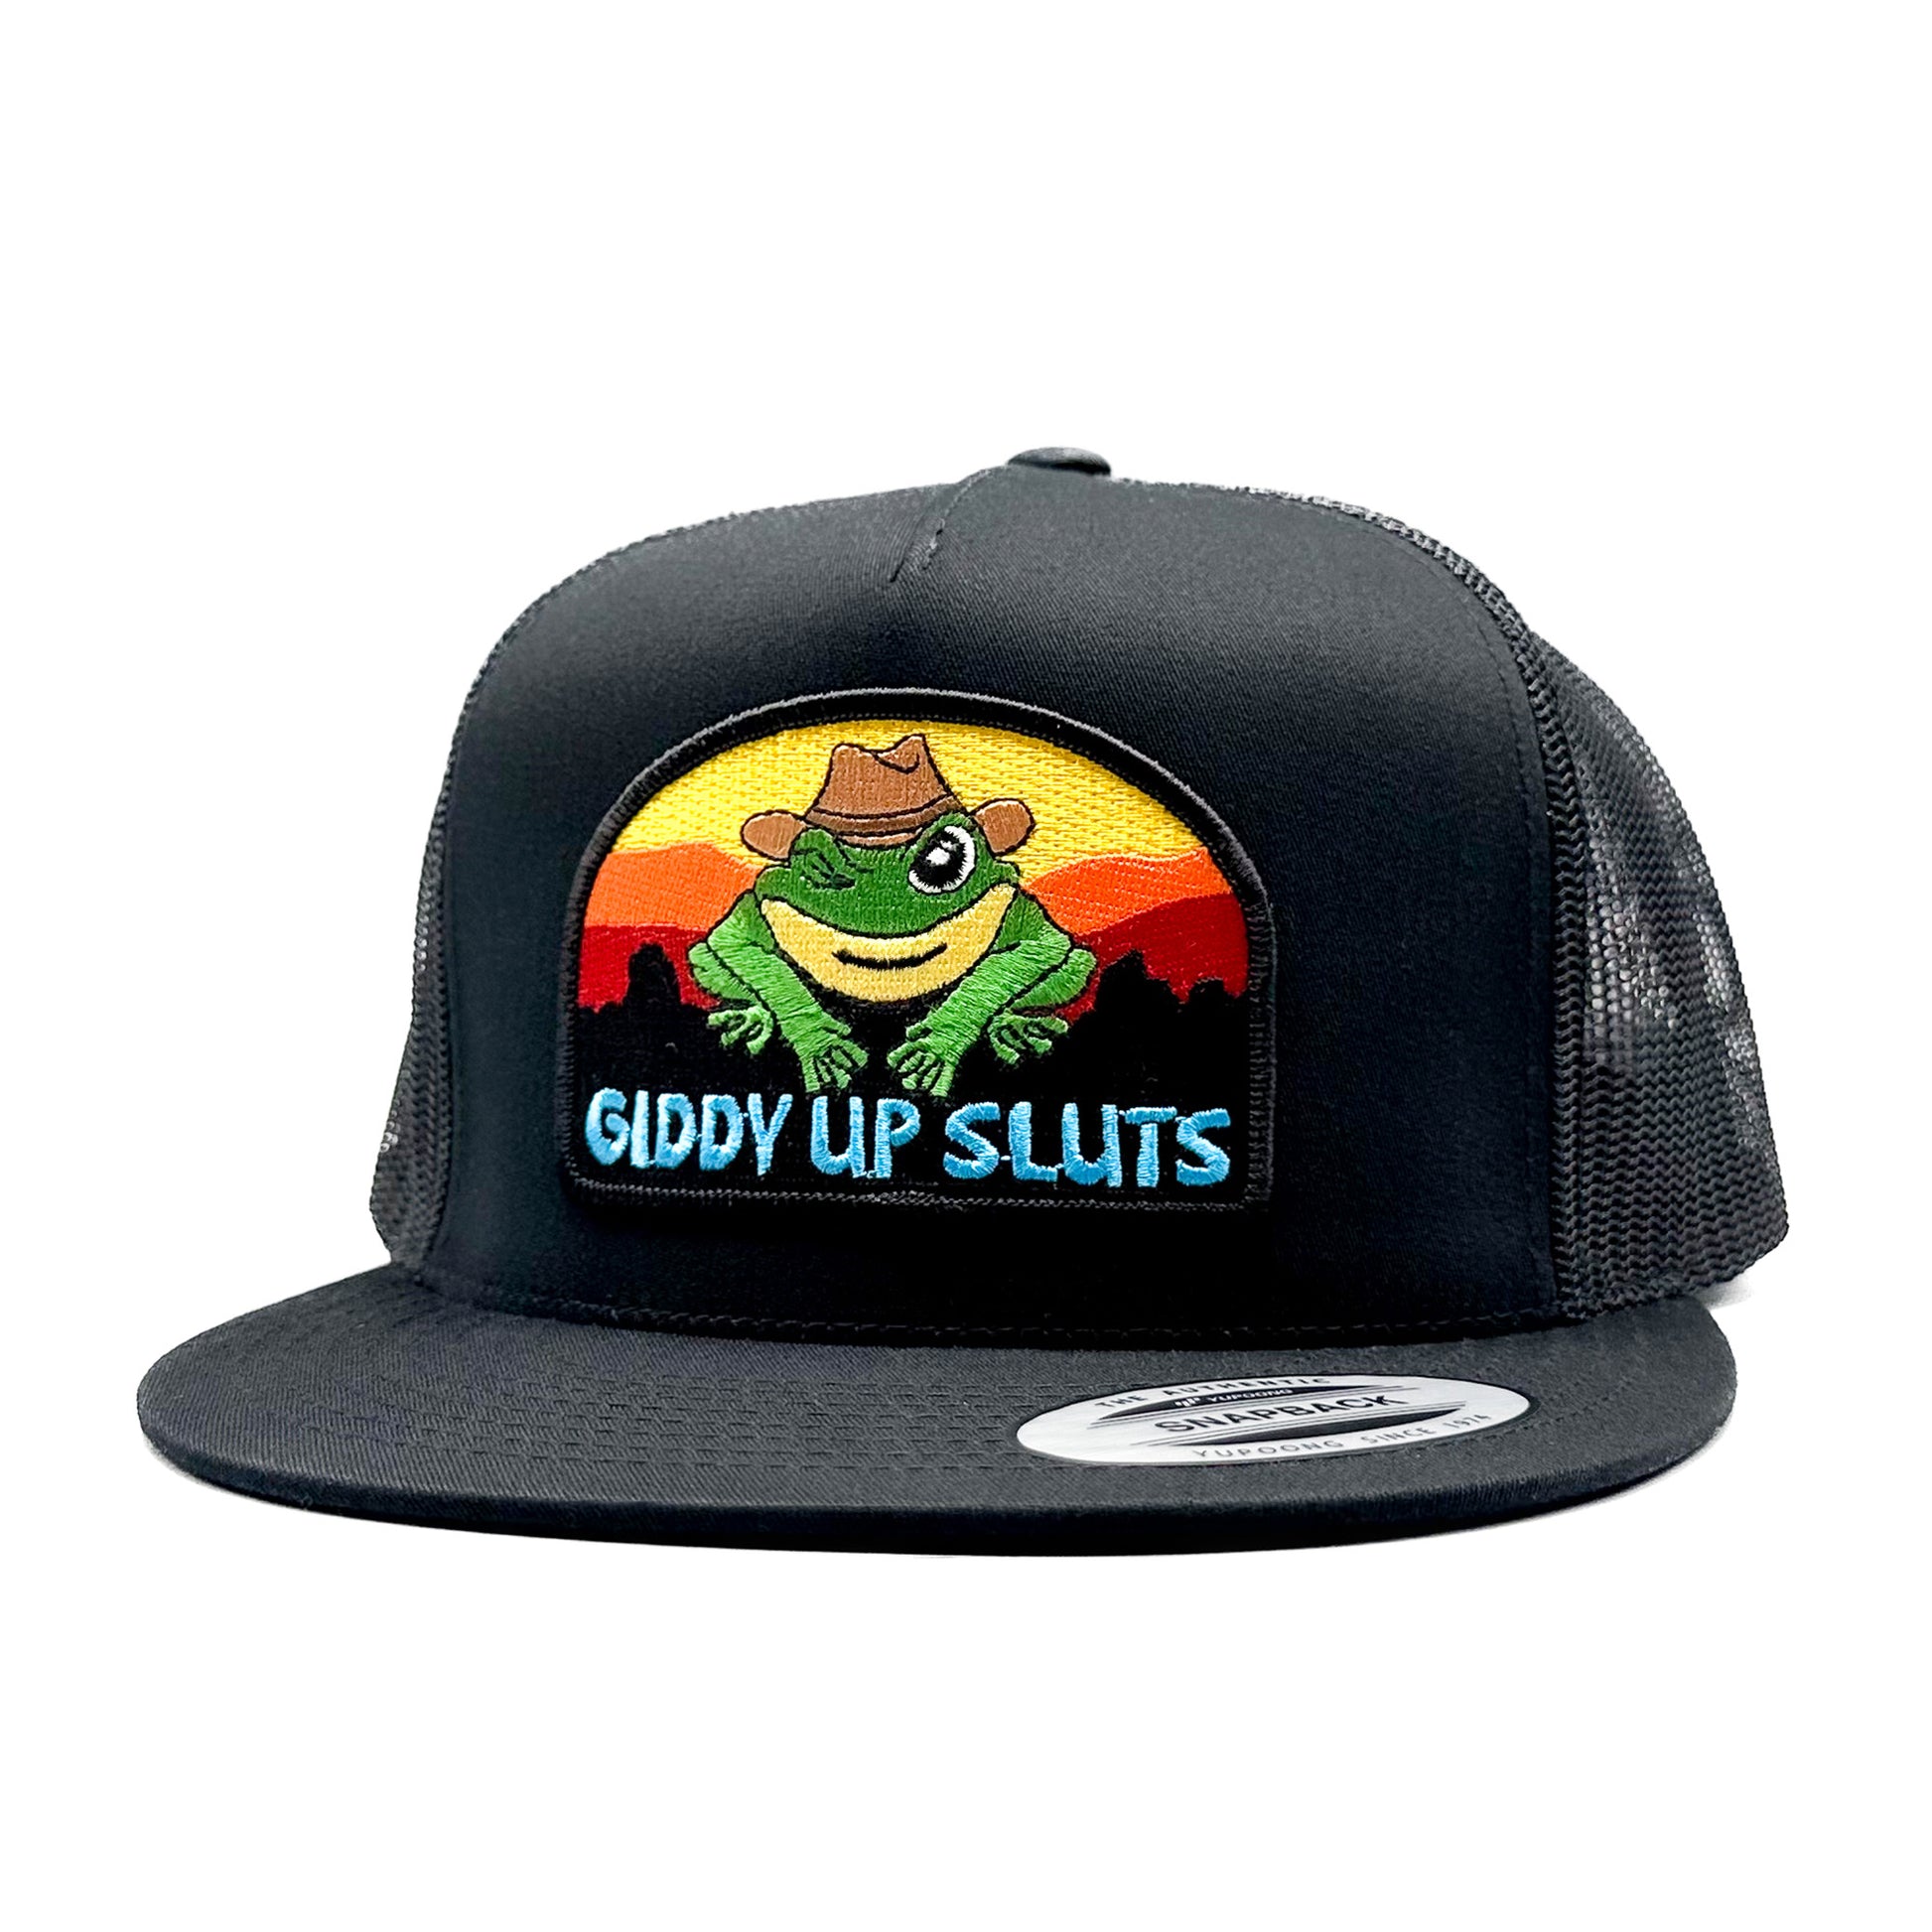 Giddy Up Sluts Trucker Hat, Funny Patch On Black Yupoong 6006